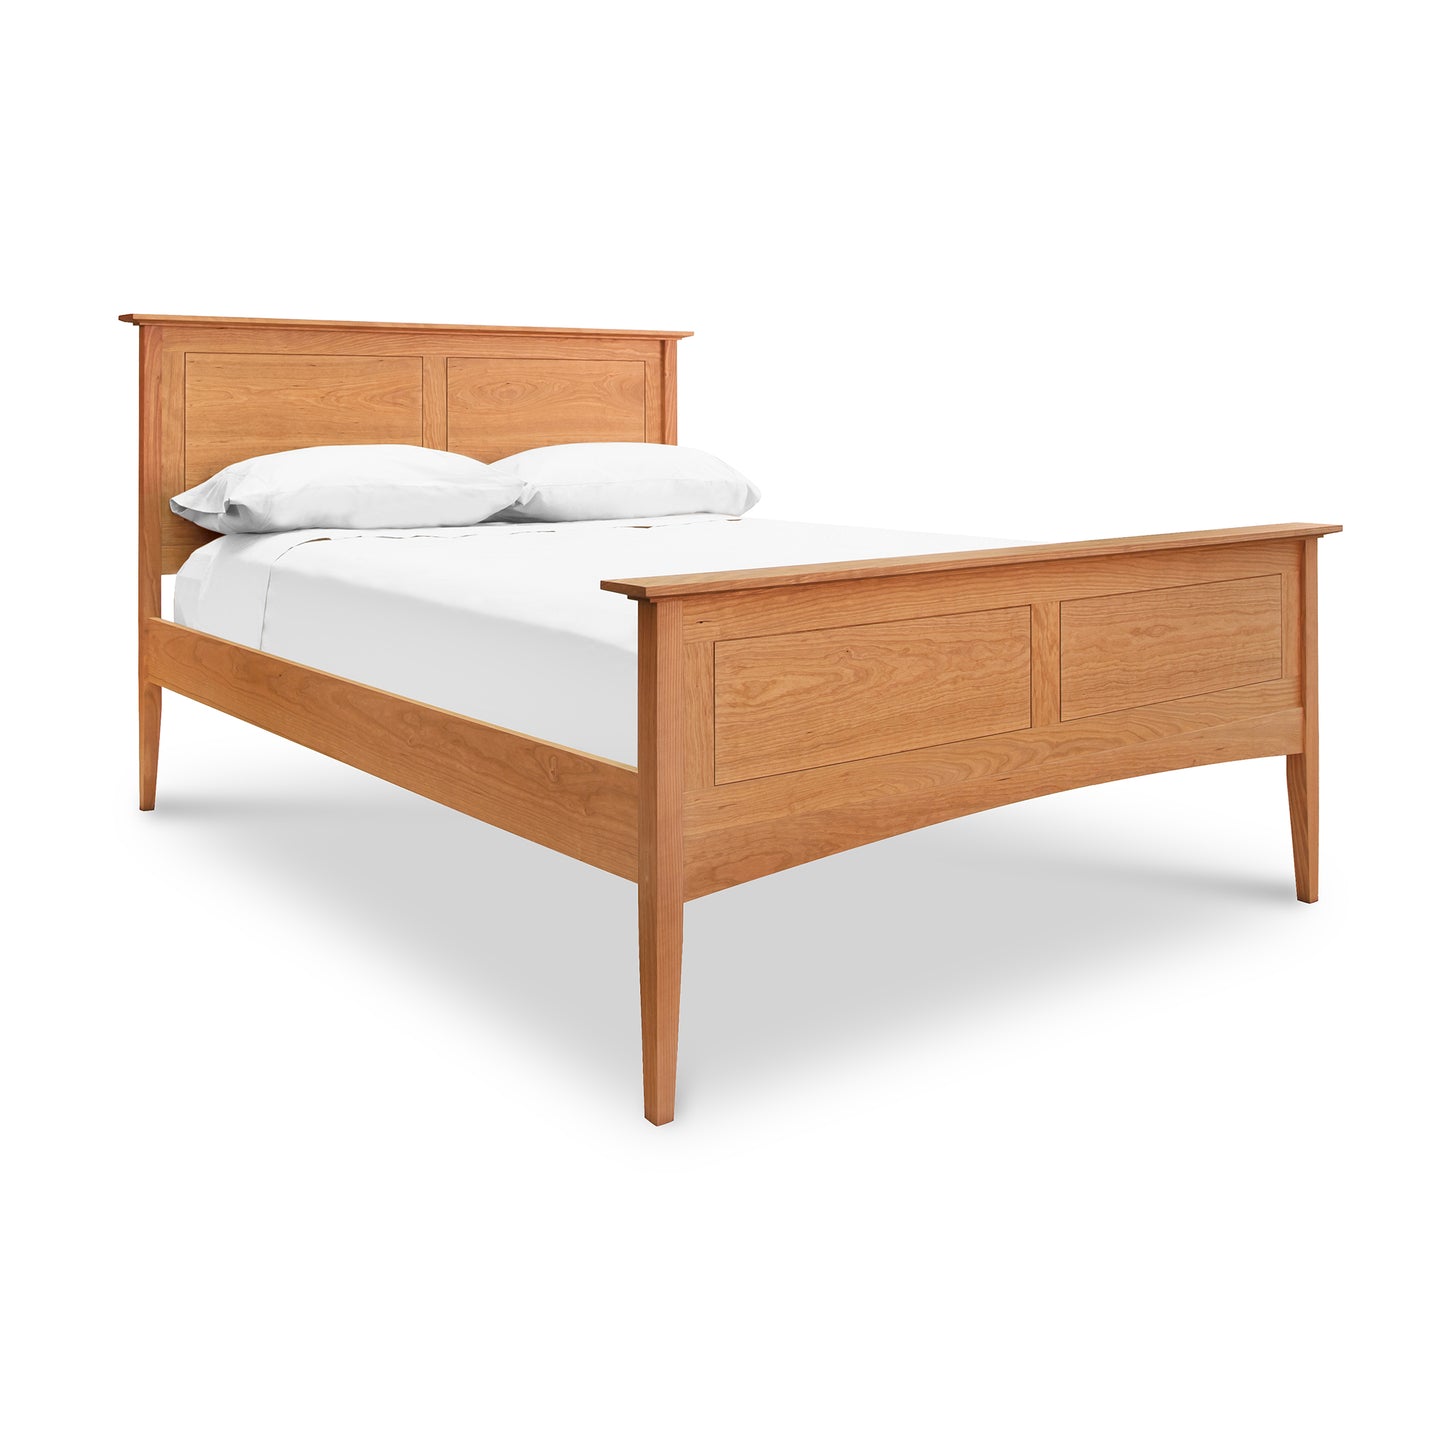 A Maple Corner Woodworks American Shaker Panel Bed with a headboard, outfitted with white bedding, isolated on a white background.